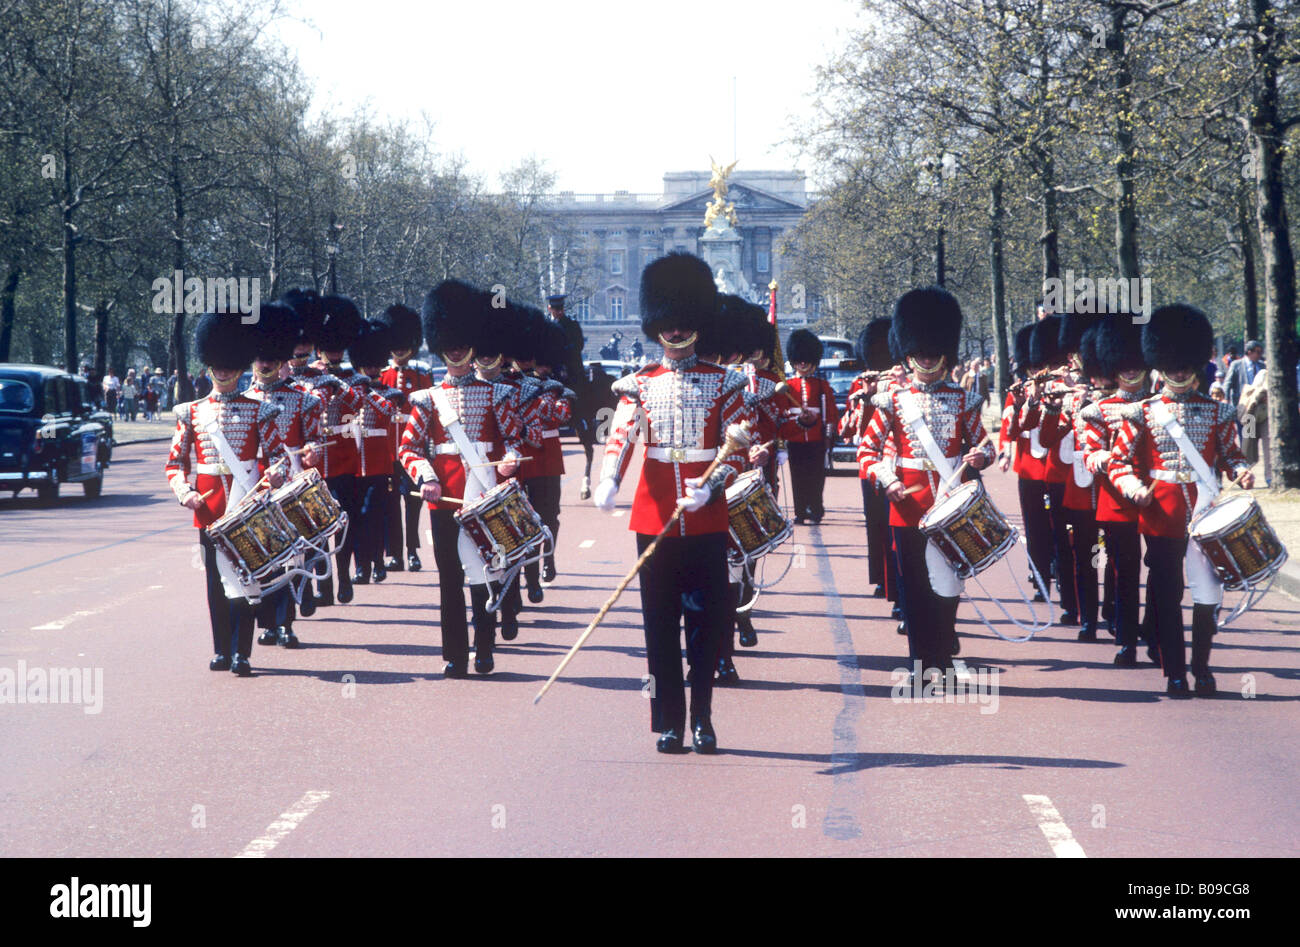 Grenadier Guards band bandsmen marching The Mall London England UK British Army uniform military drums ceremony ceremonial Stock Photo